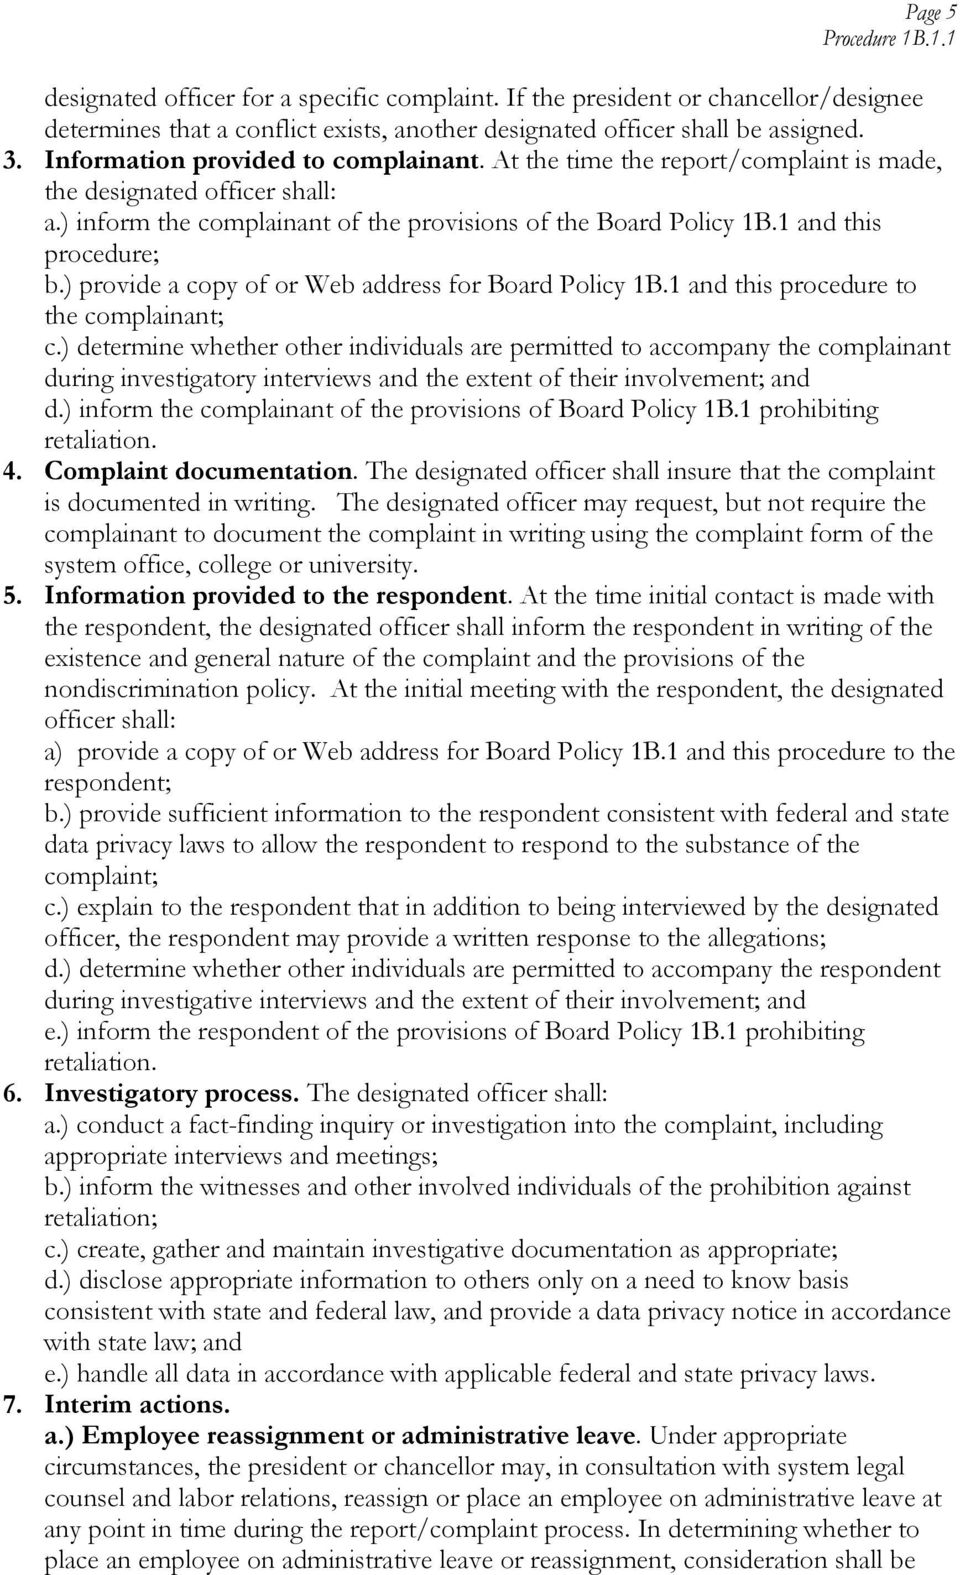 1 and this procedure; b.) provide a copy of or Web address for Board Policy 1B.1 and this procedure to the complainant; c.